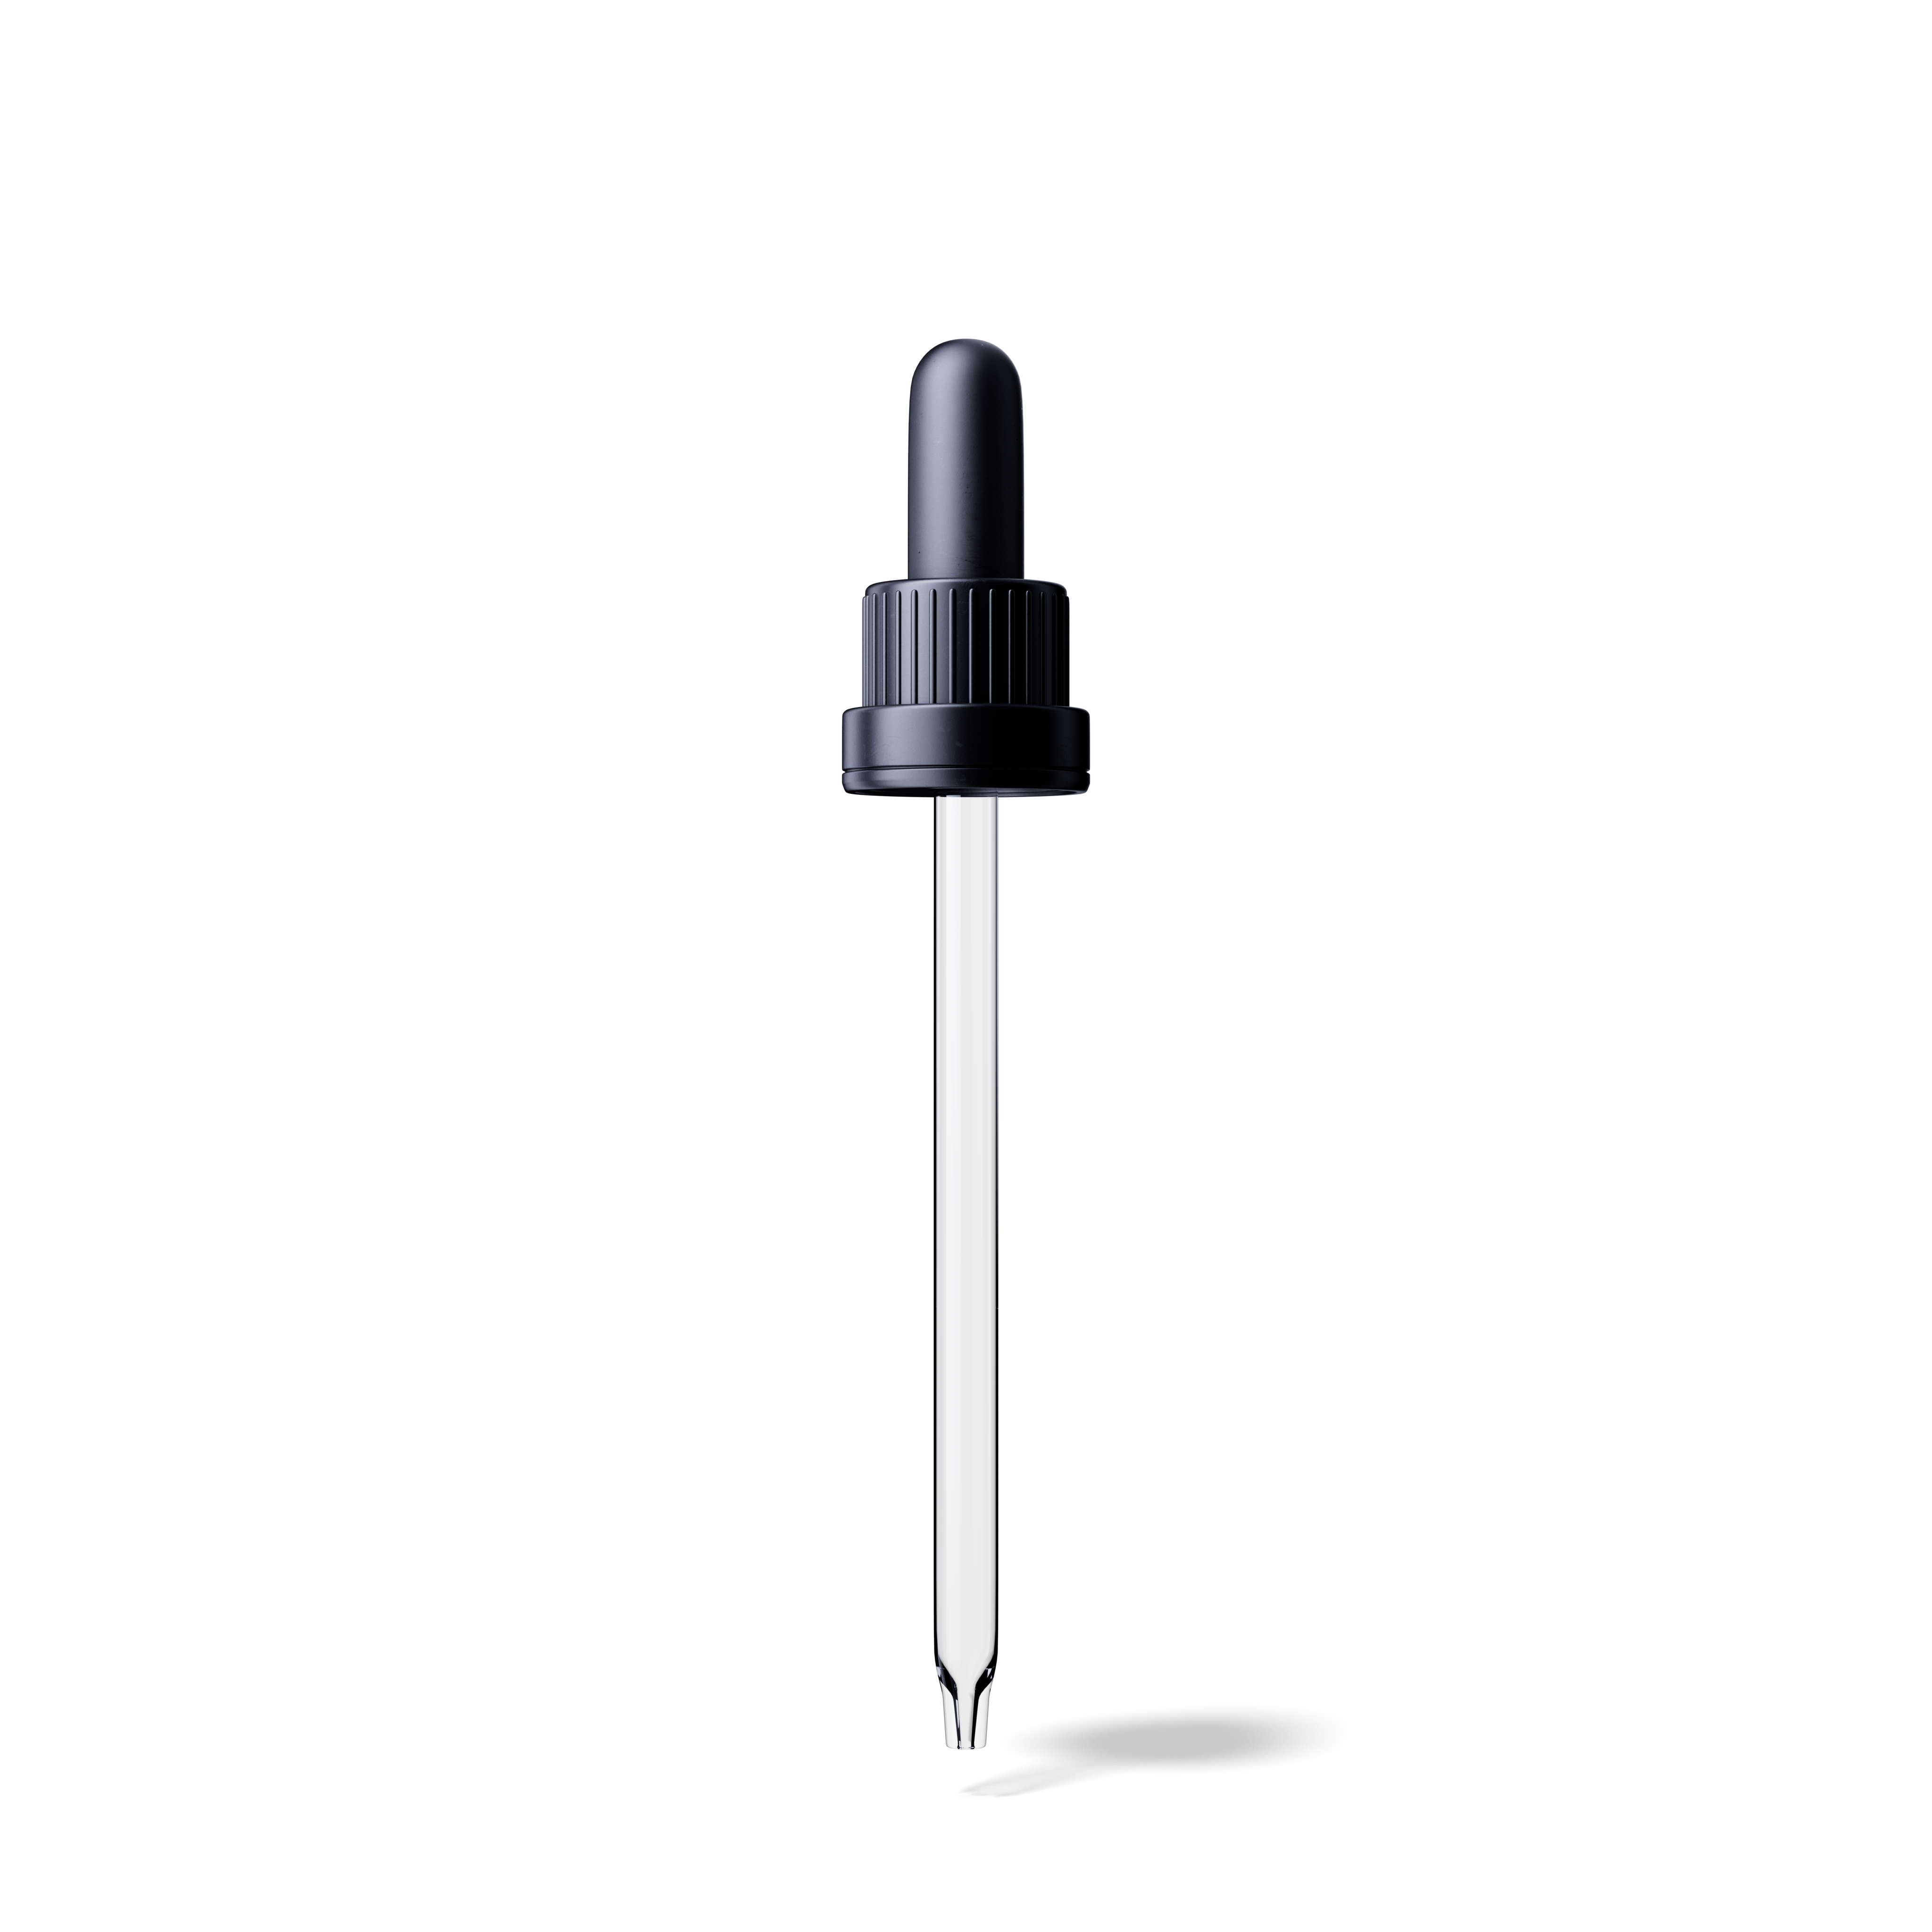 Pipette tamper evident DIN18, III, black, ribbed, bulb NBR, dose 1.0ml, conical tip (Orion 60)